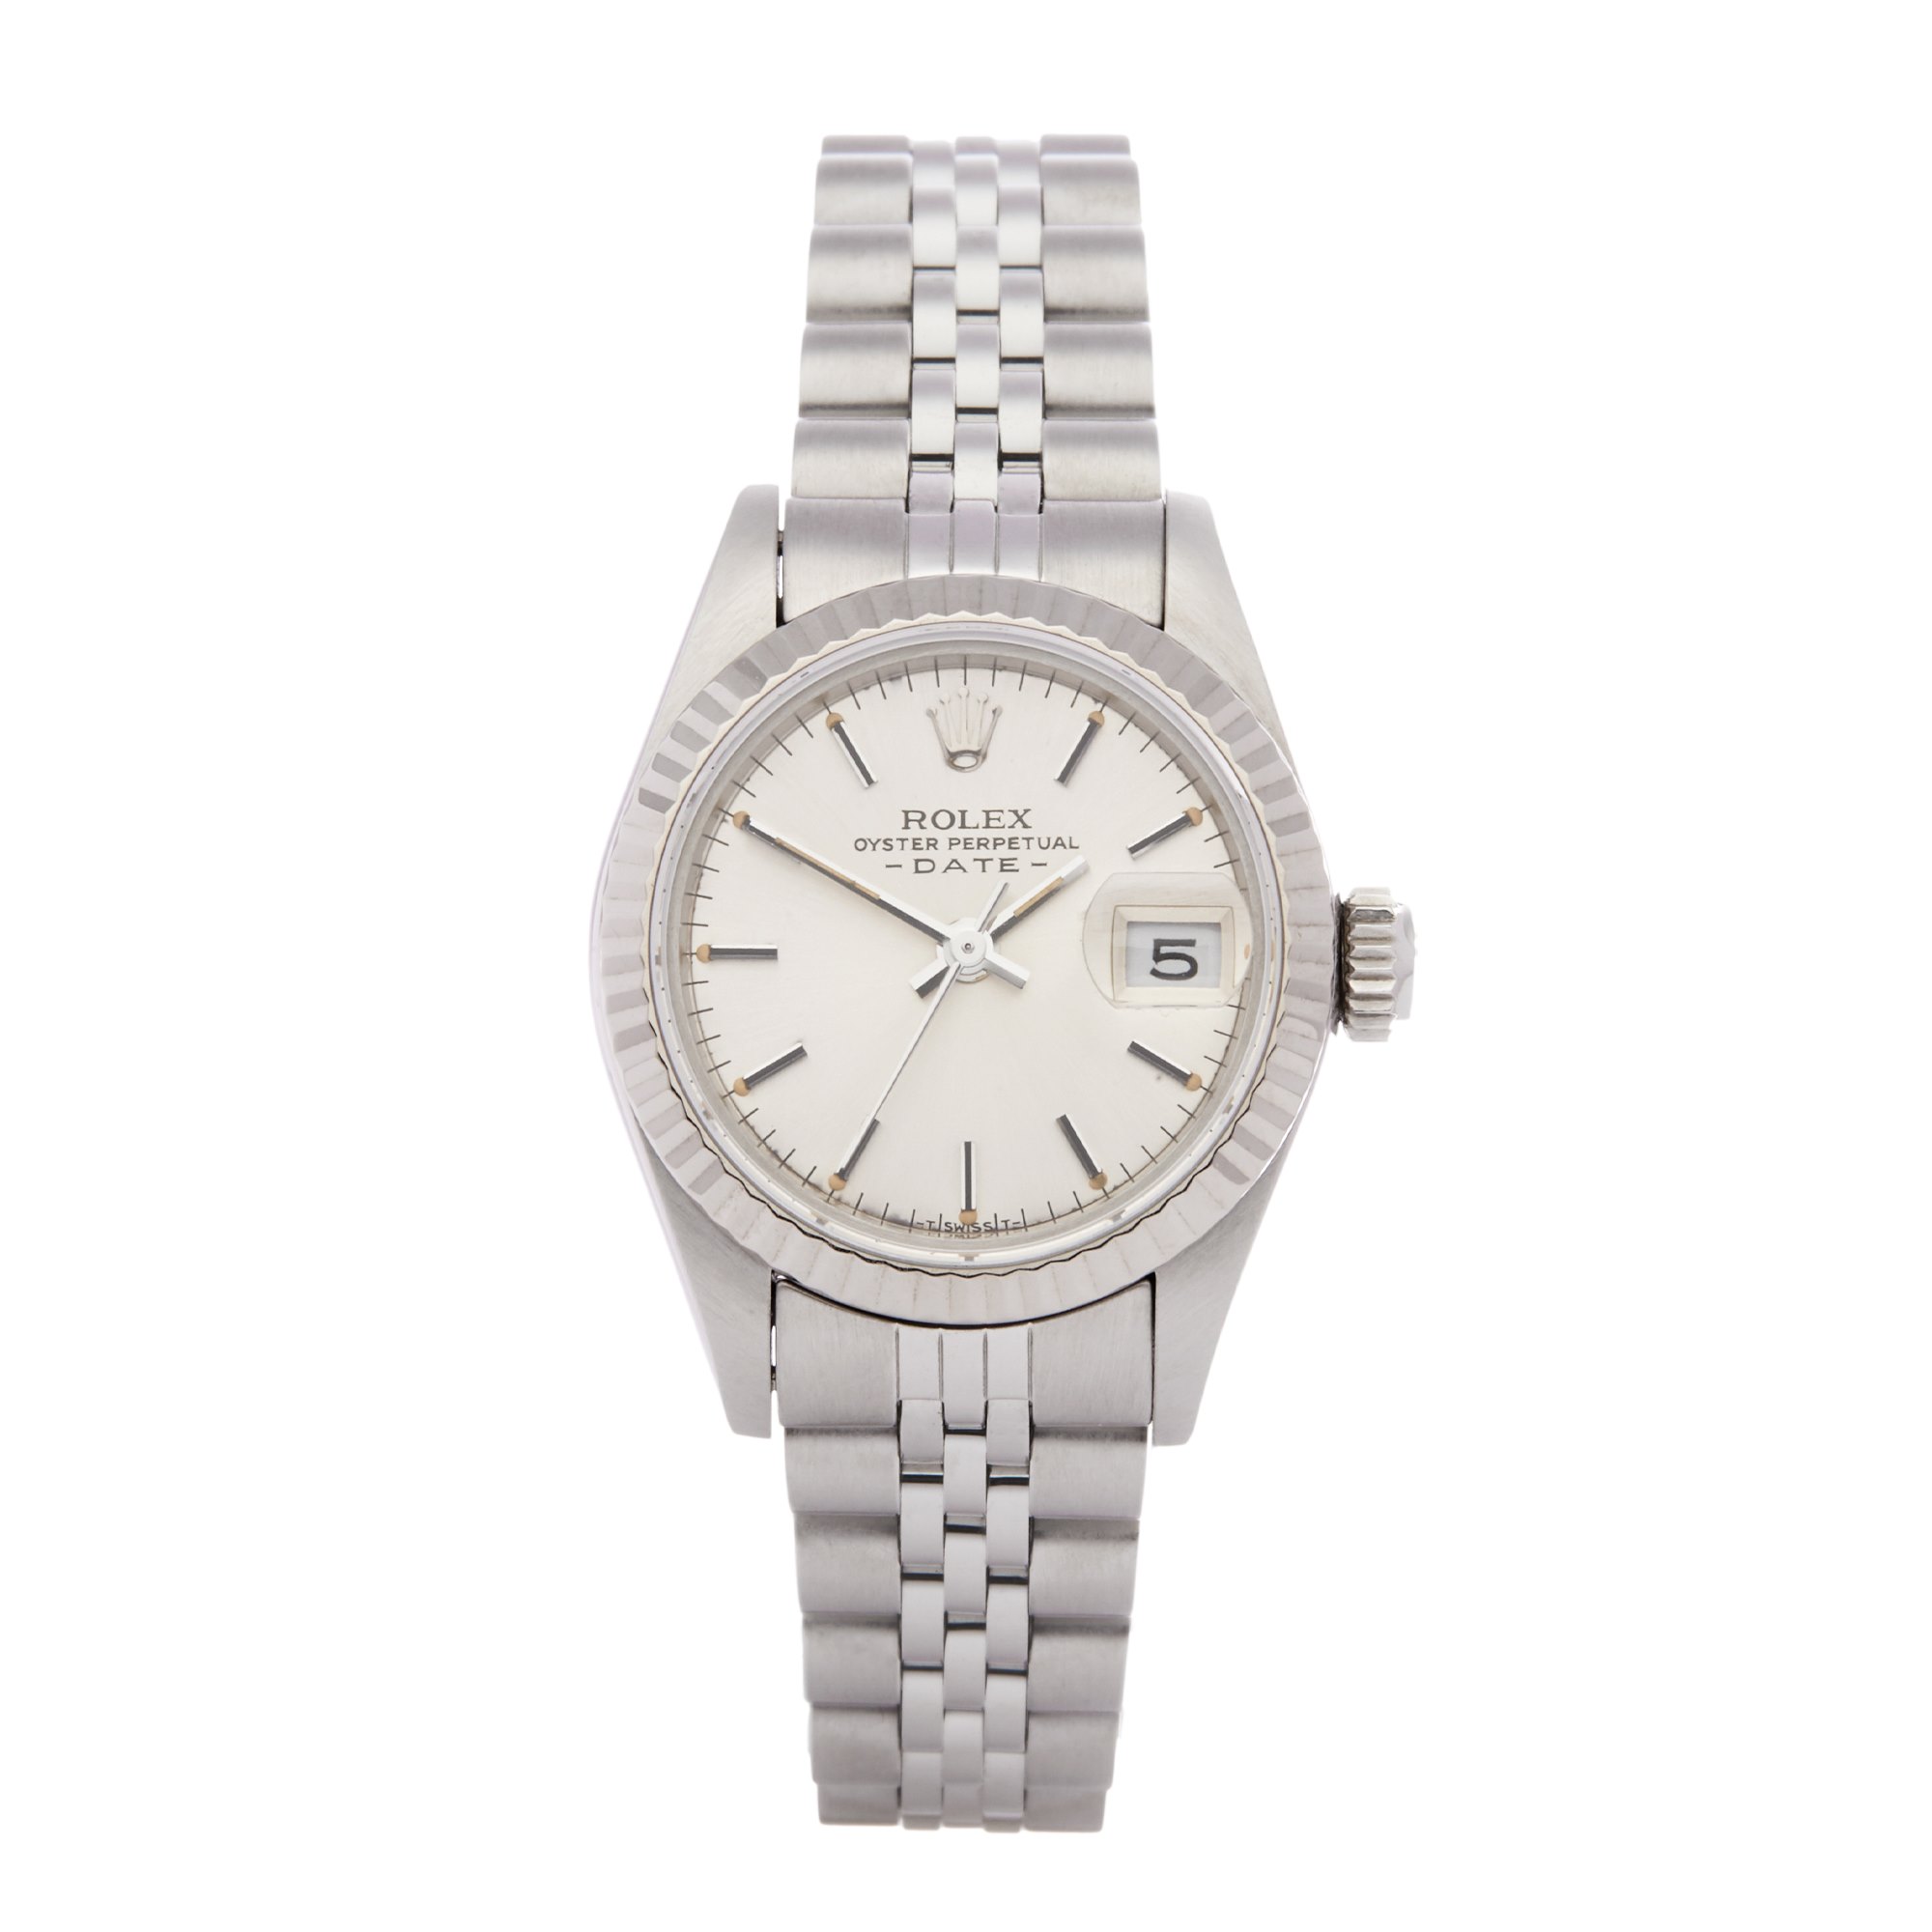 Rolex Datejust 26 69174 Ladies Stainless Steel Watch - Image 2 of 8